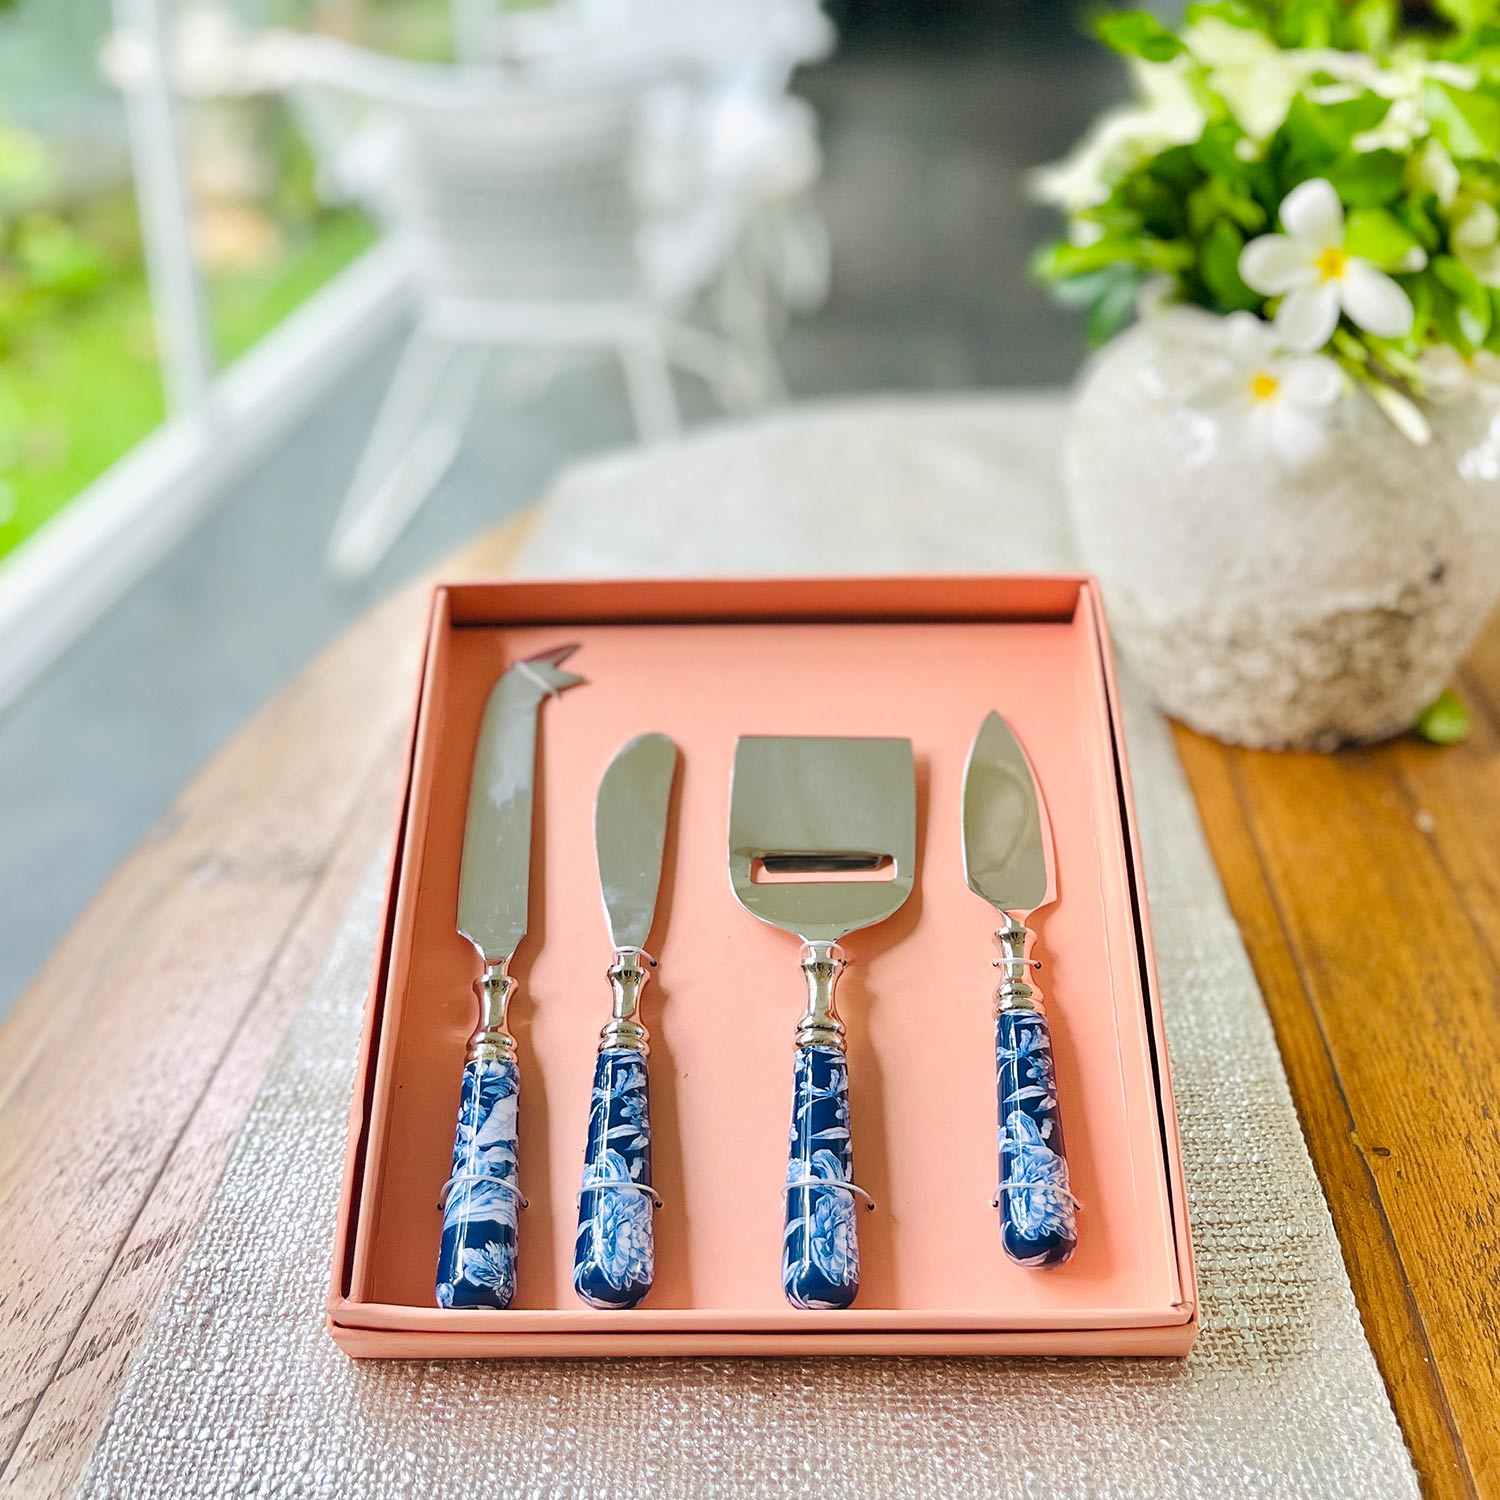 Cheese Knives, Set of 4 - Brittany Bleu